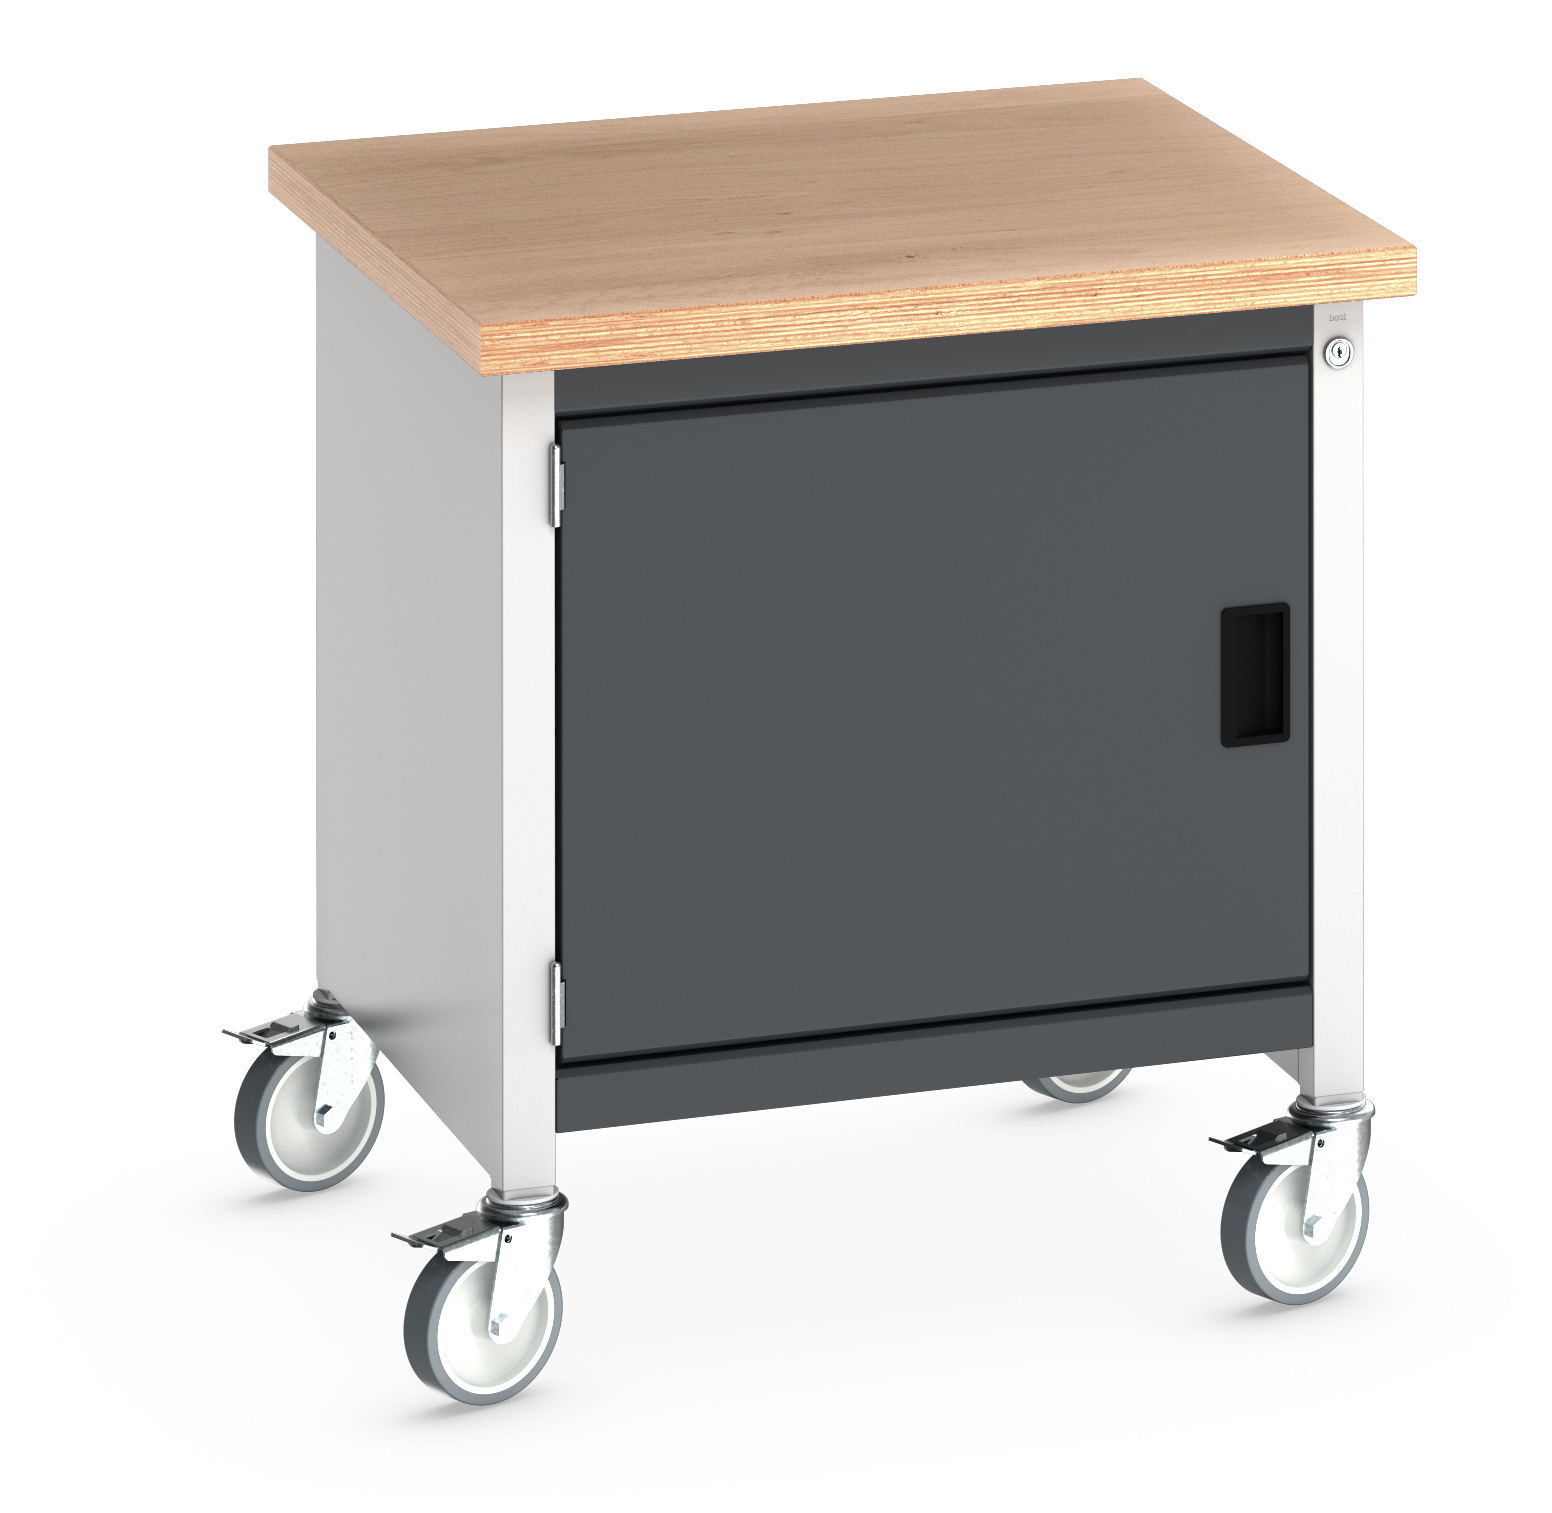 Bott Cubio Mobile Storage Bench With Full Cupboard - 41002085.19V